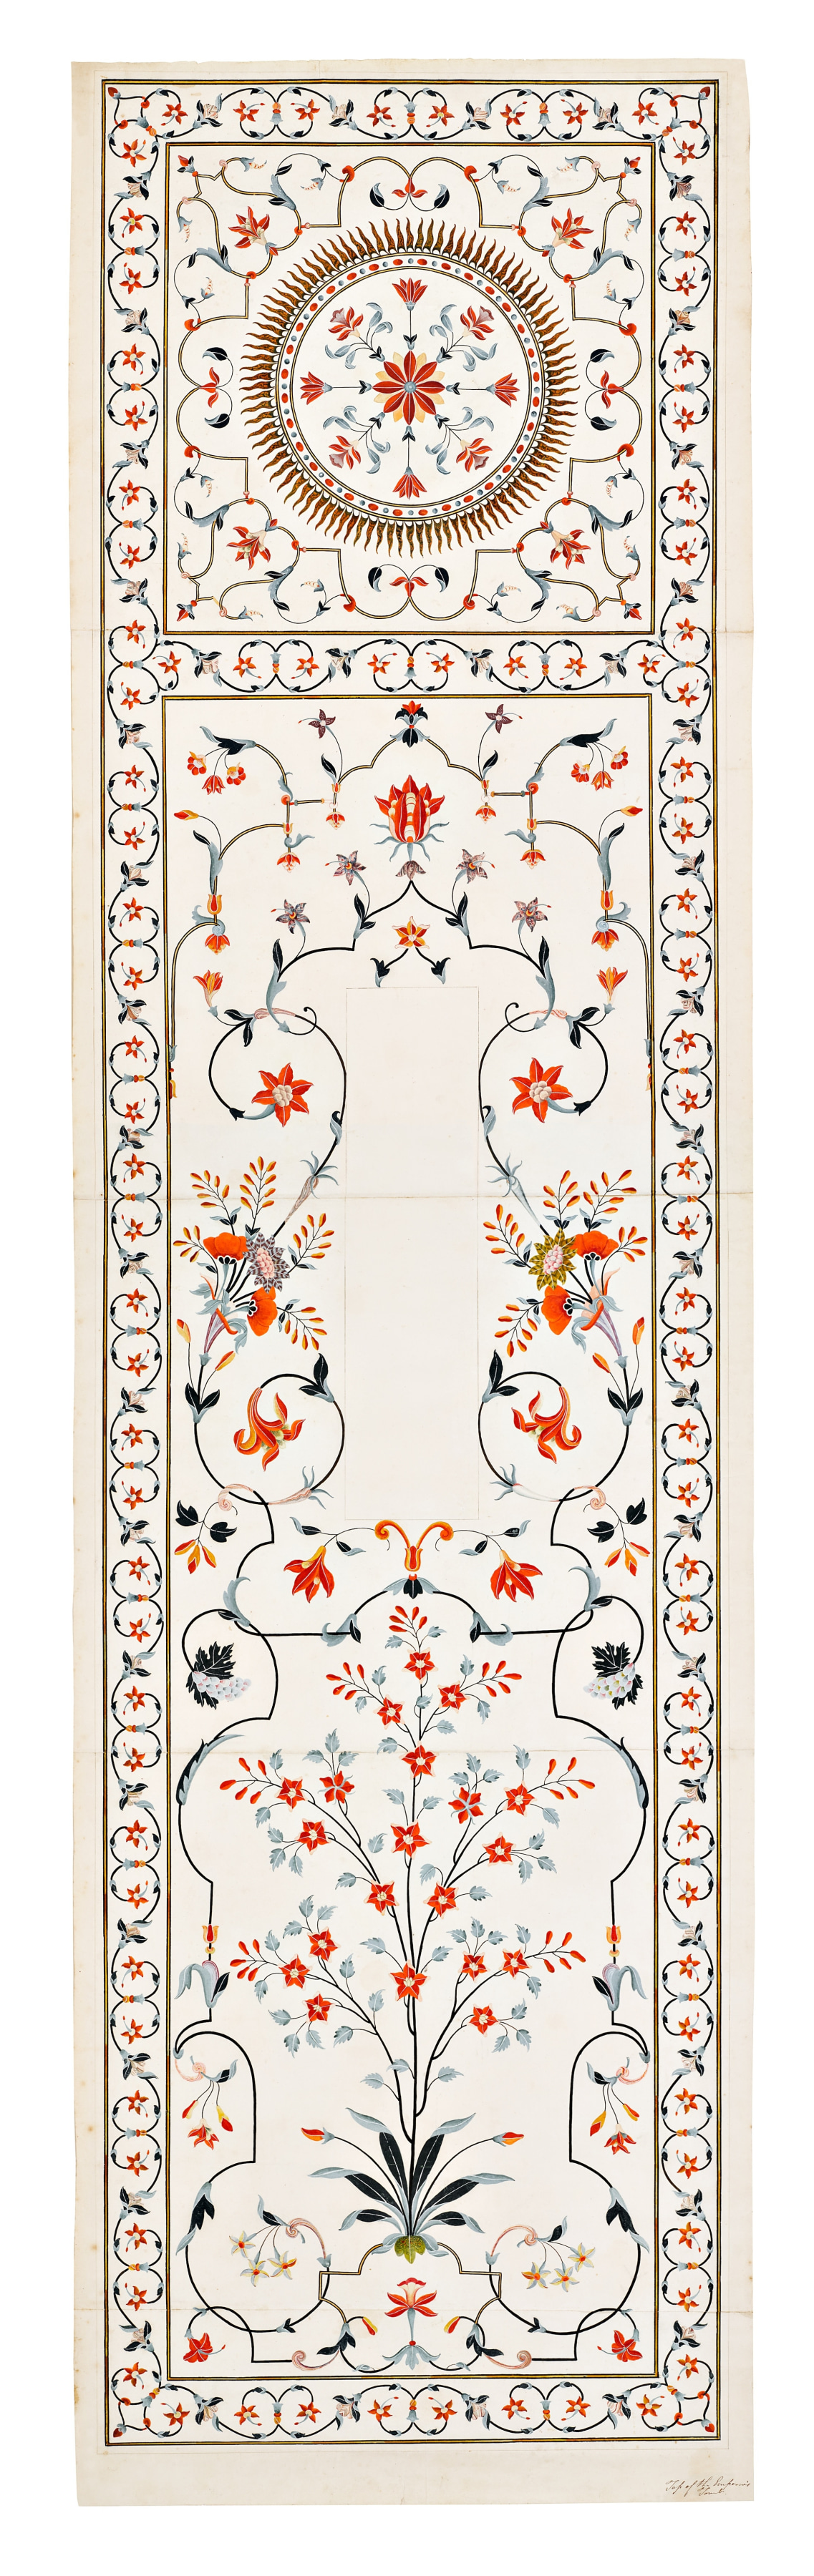 A Pietra Dura Architectural Study of the Top of the Cenotaph of Shah Jahan in the Taj Mahal